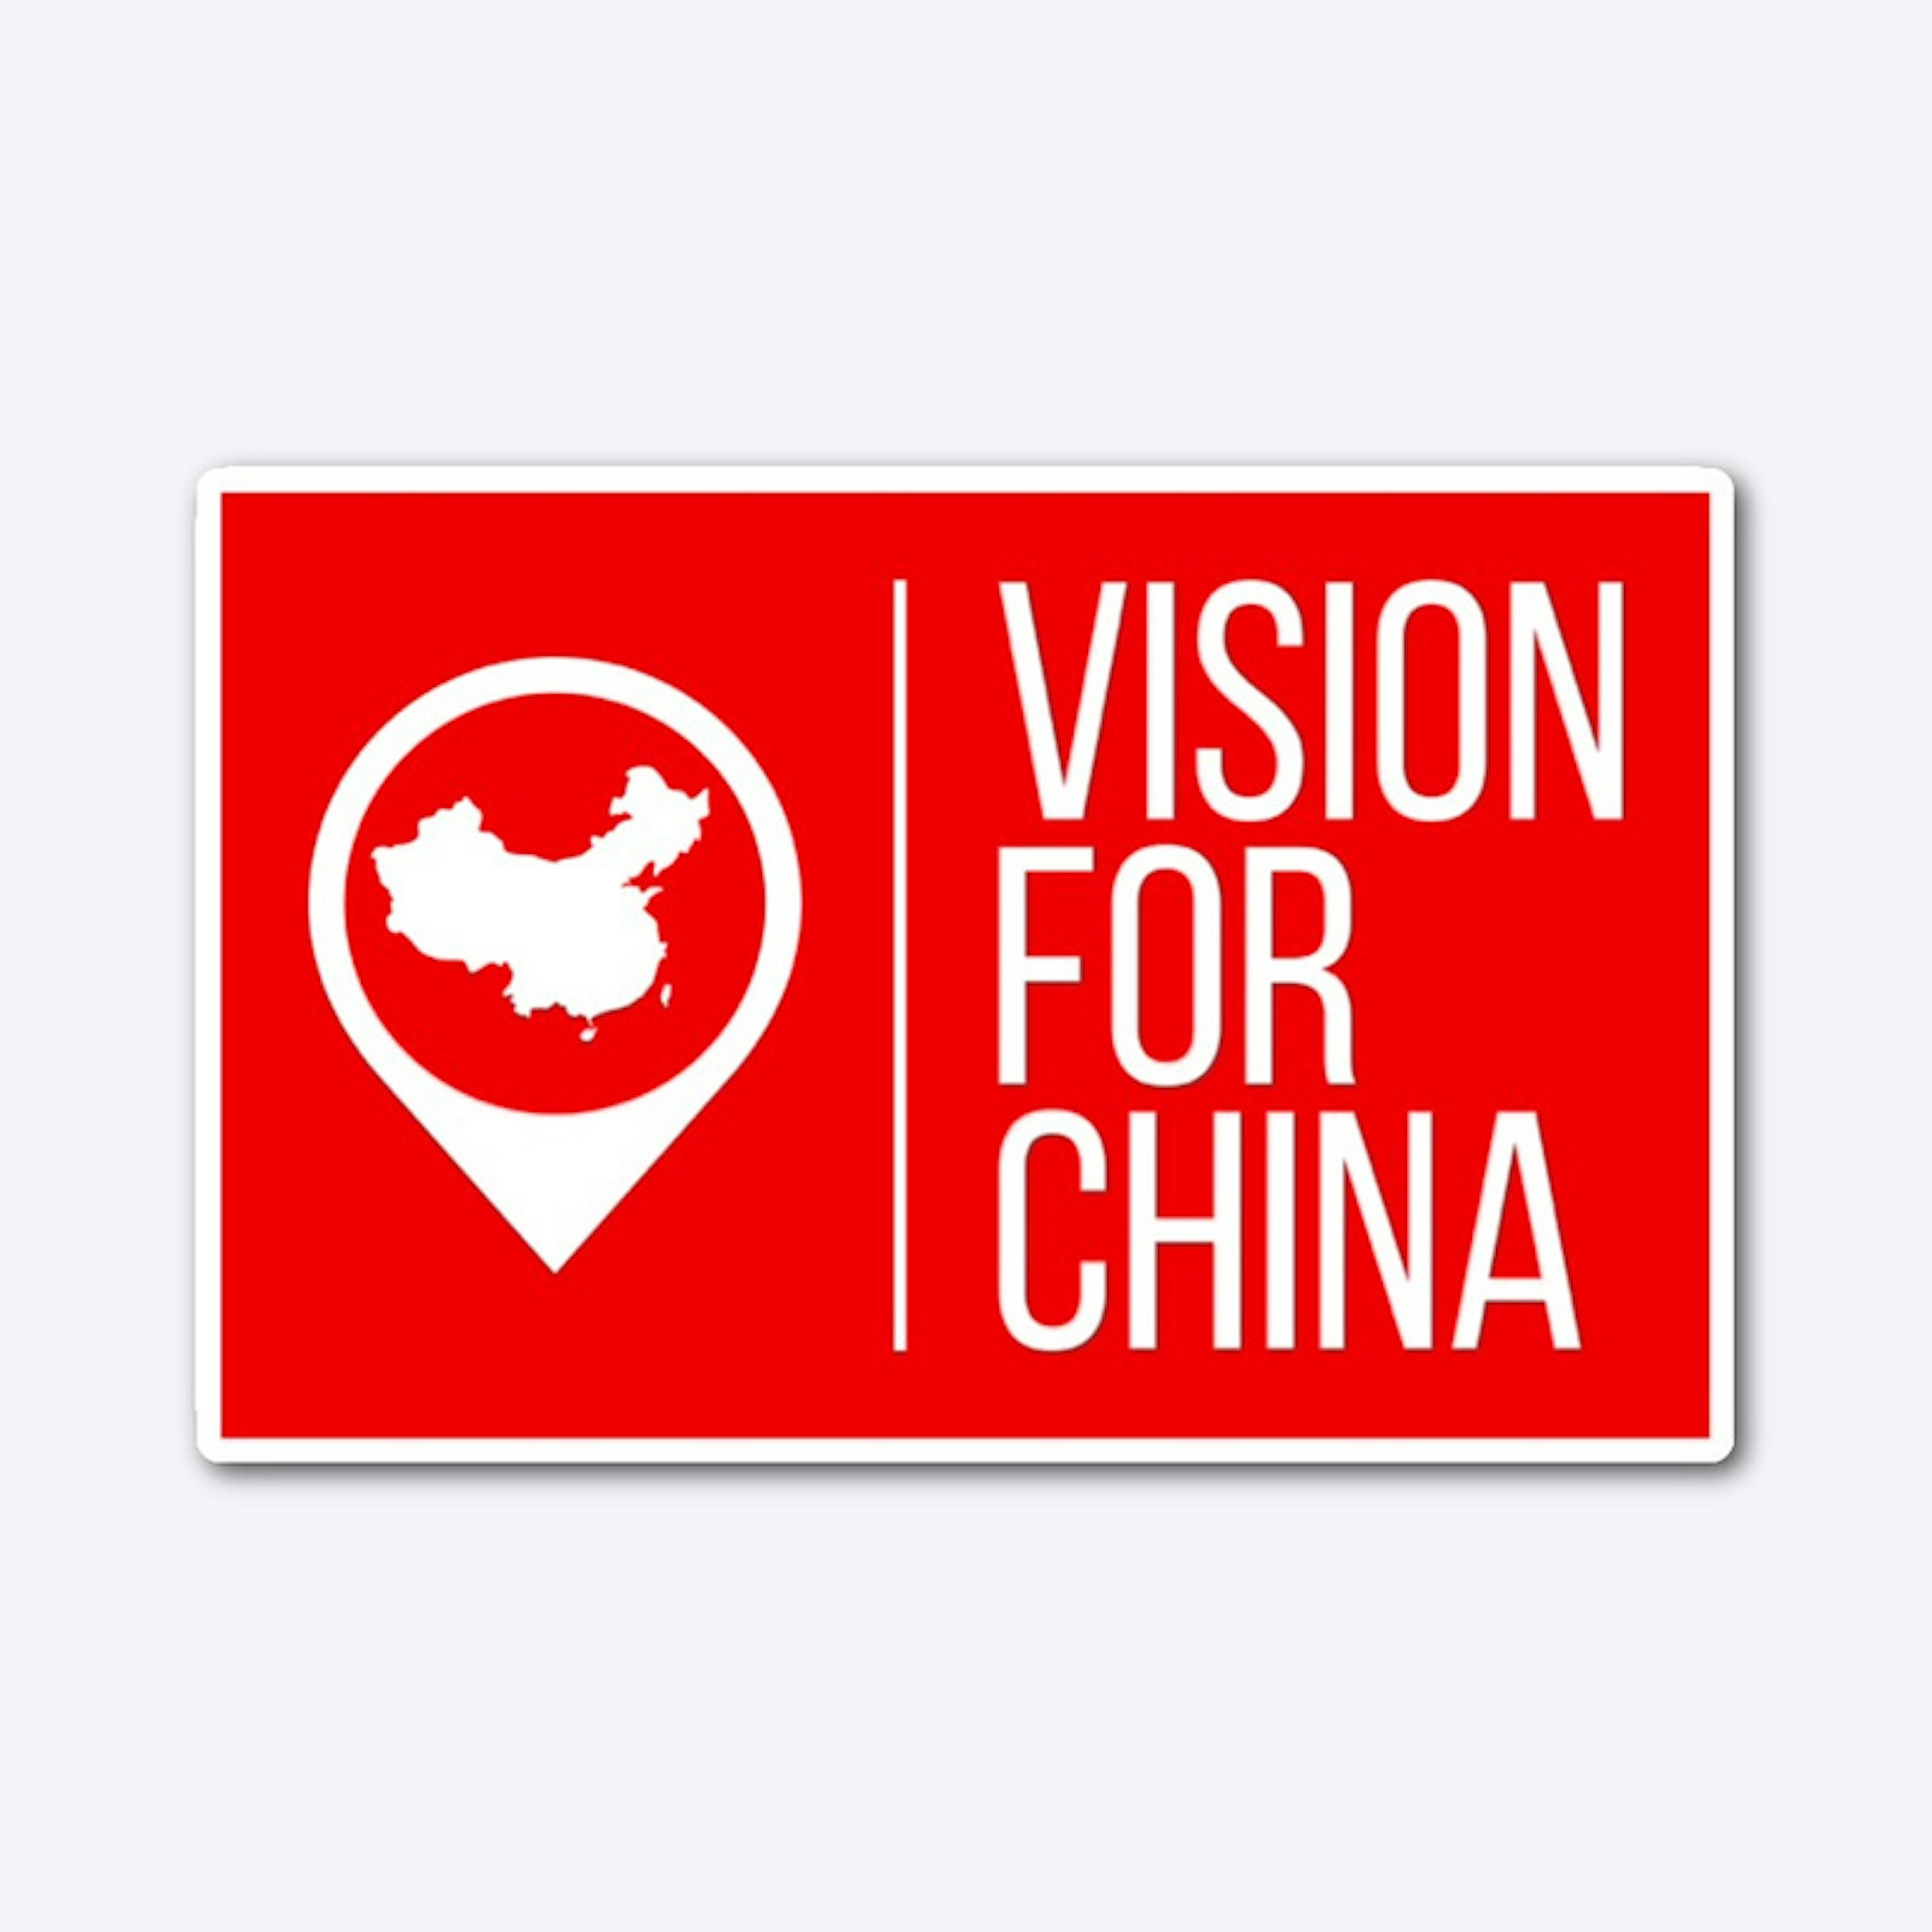 "Vision For China" Die Cut Sticker